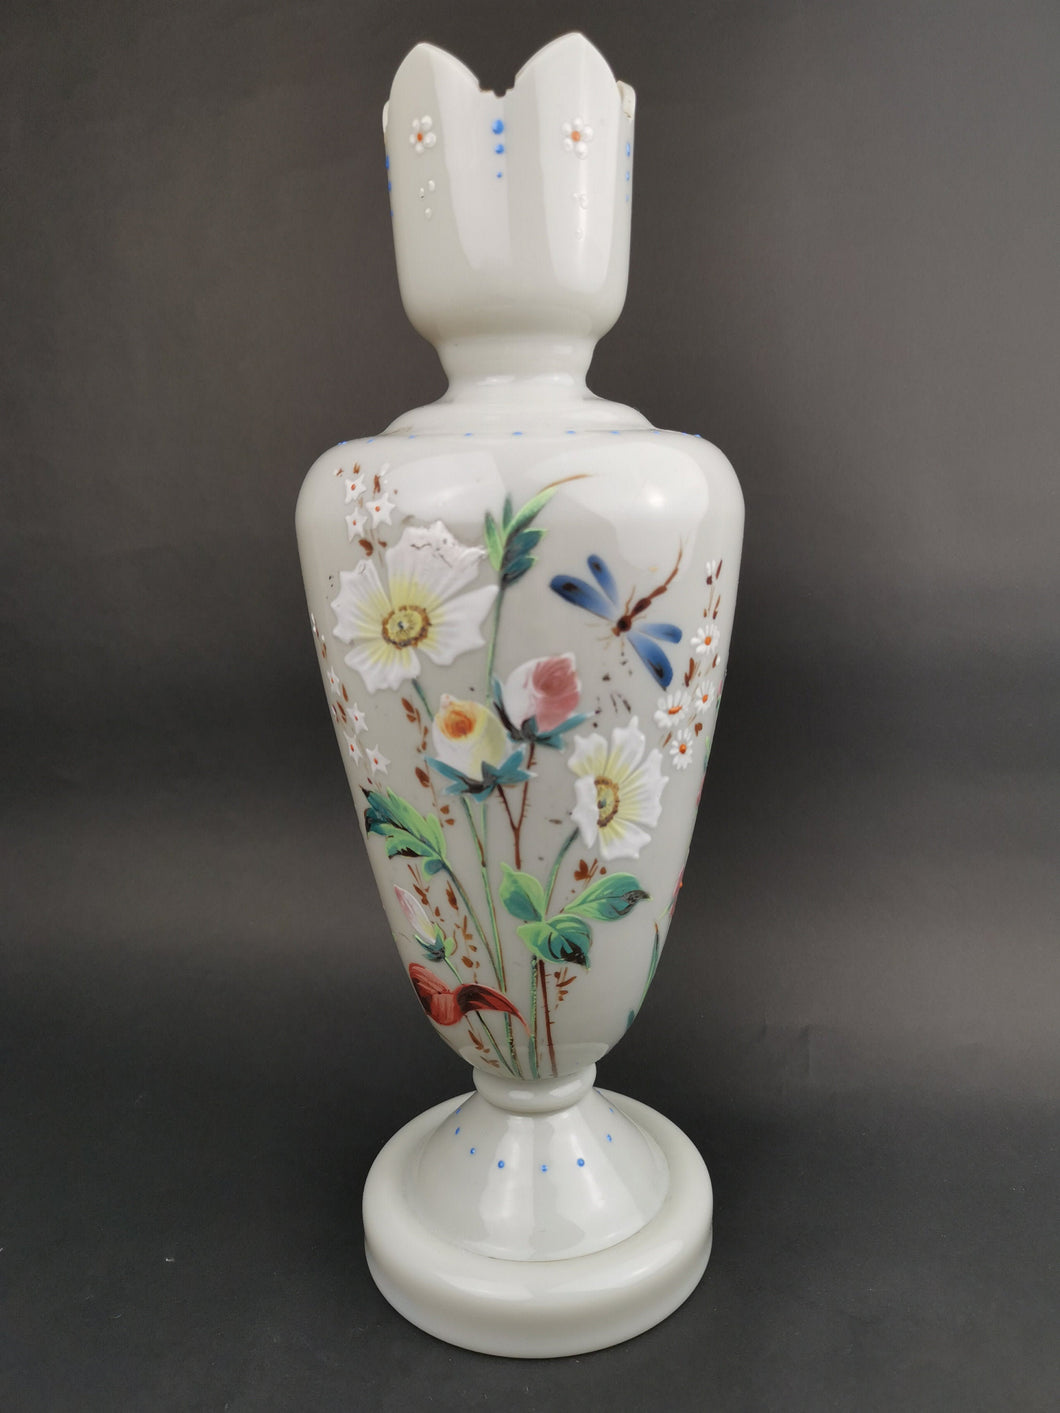 Antique Grey Glass Vase with Hand Painted with Multicolor Flowers and Dragonfly Victorian 1800's Original